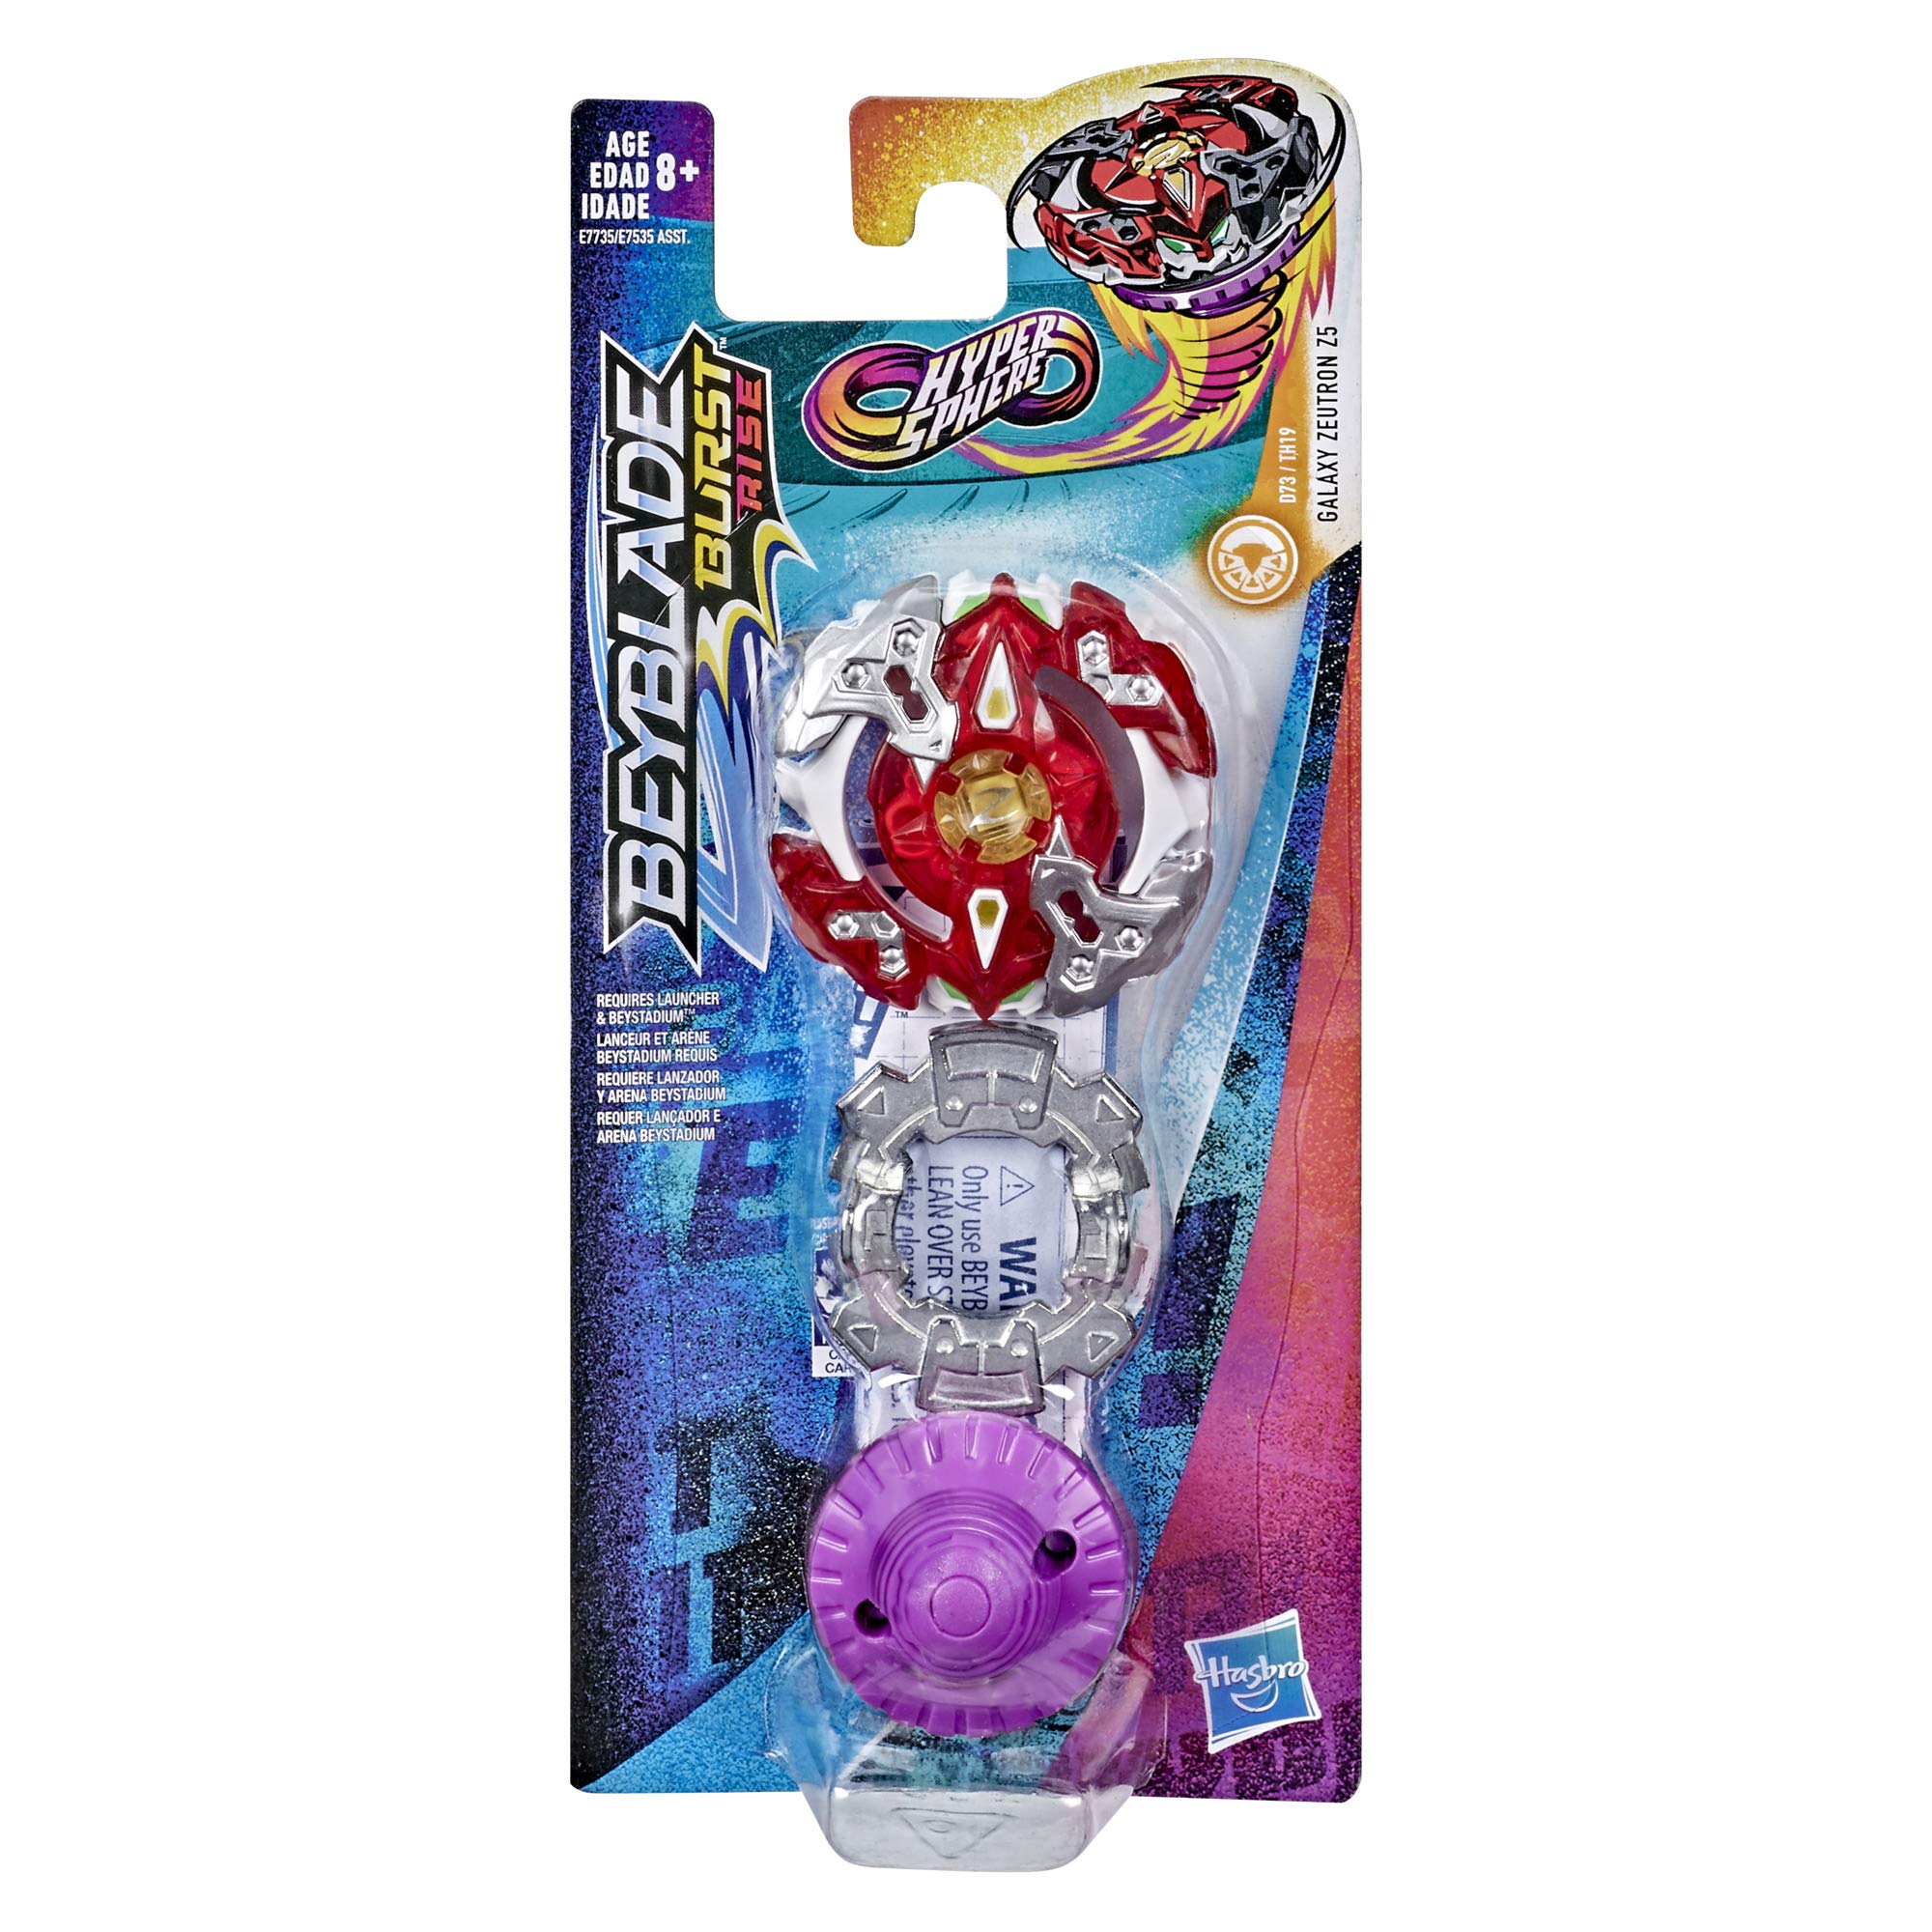 BEYBLADE Burst Rise Hypersphere Galaxy Zeutron Z5 Single Pack - Stamina Type Right-Spin Battling Top Toy, Ages 8 and Up